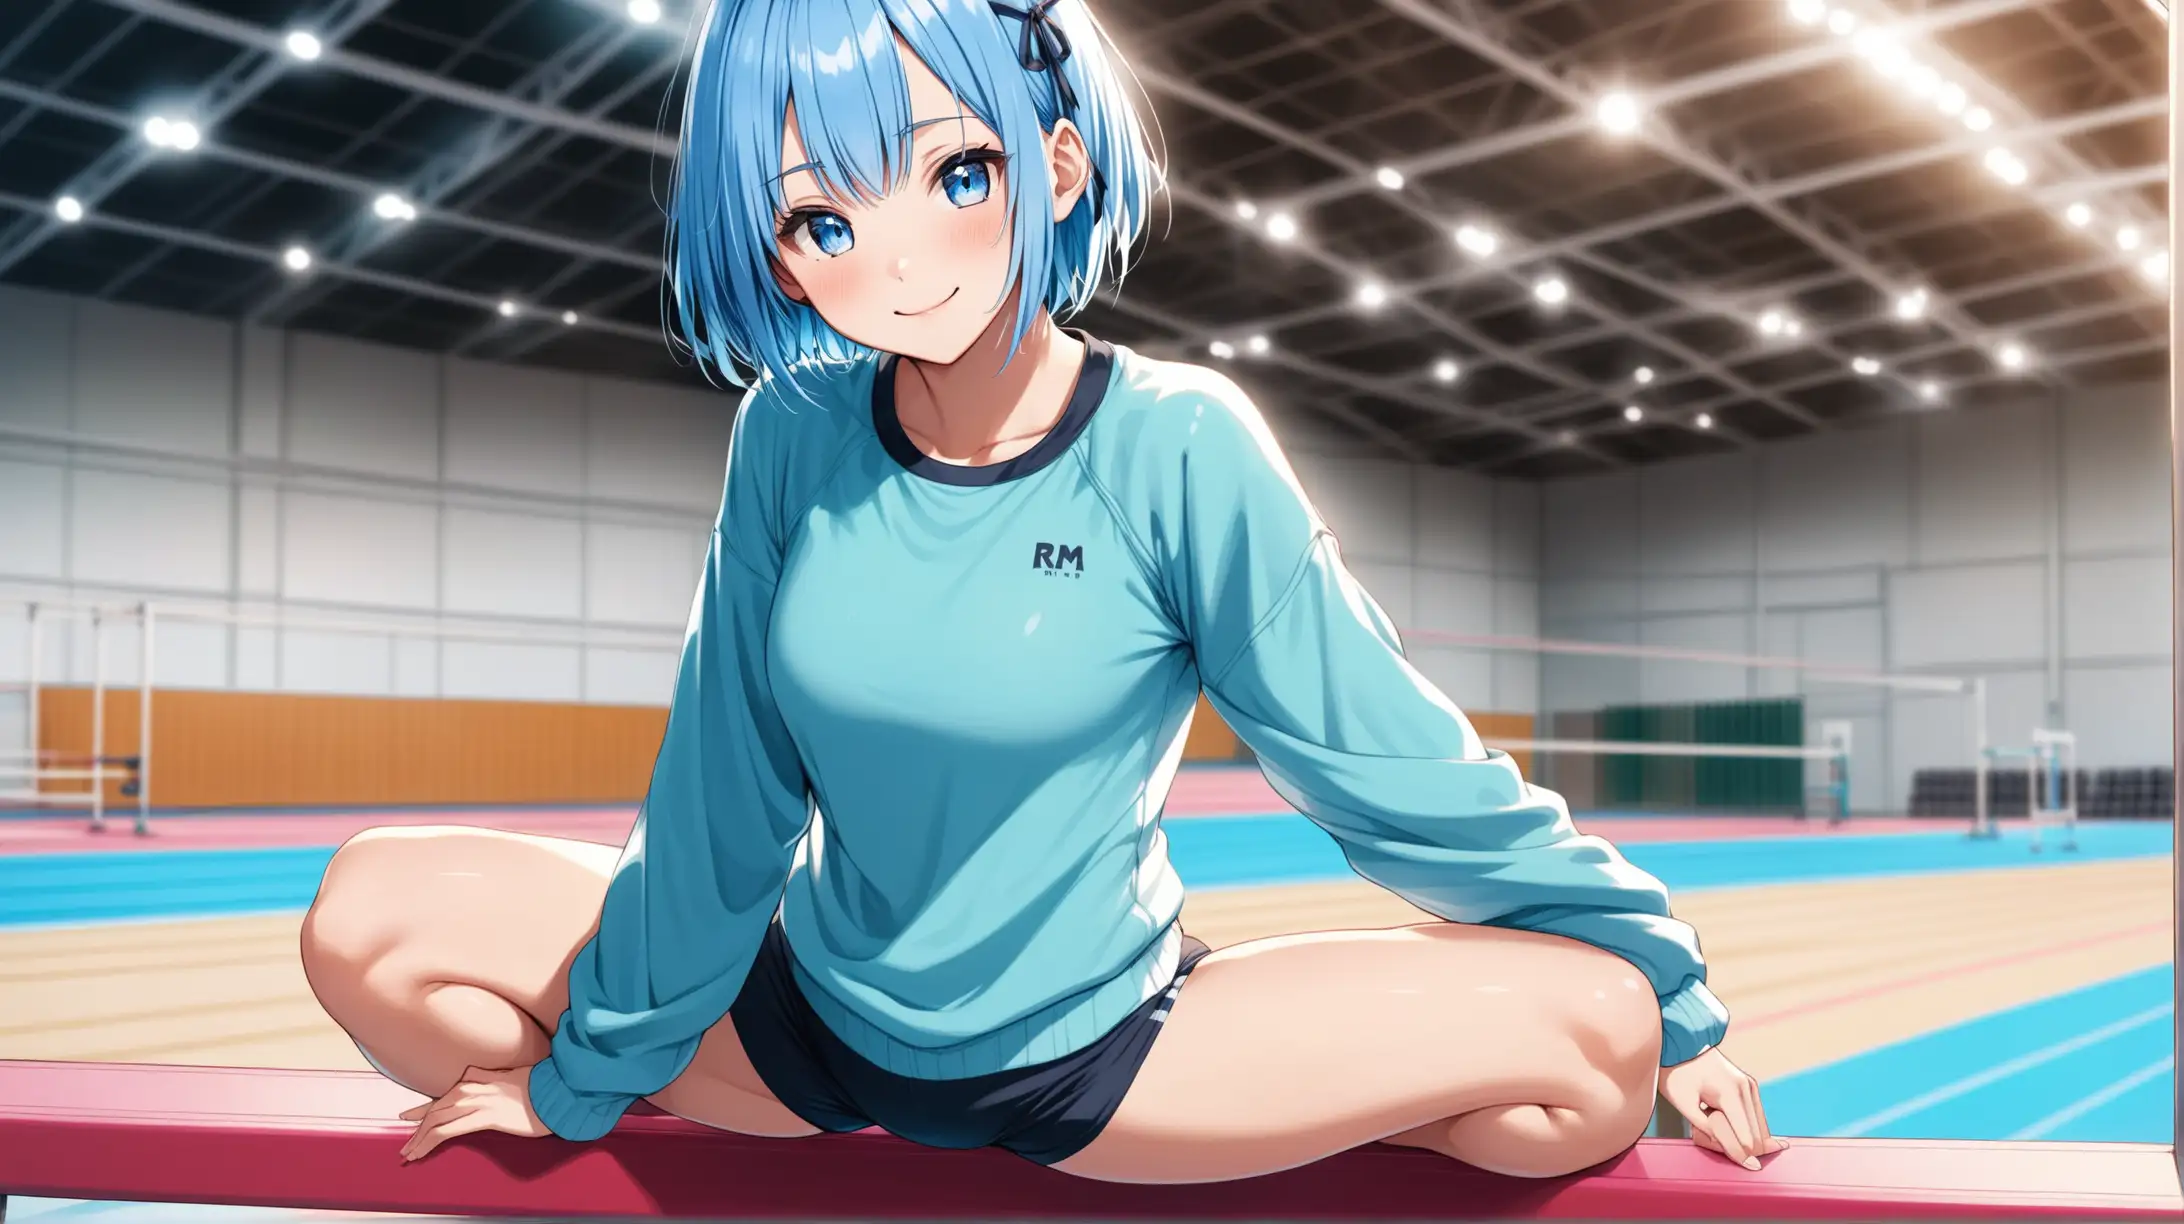 Draw the character Rem, high quality, indoors, in a gymnastics arena, medium shot, in a casual pose, on a gymnastics beam, wearing gym clothes, smiling at the viewer